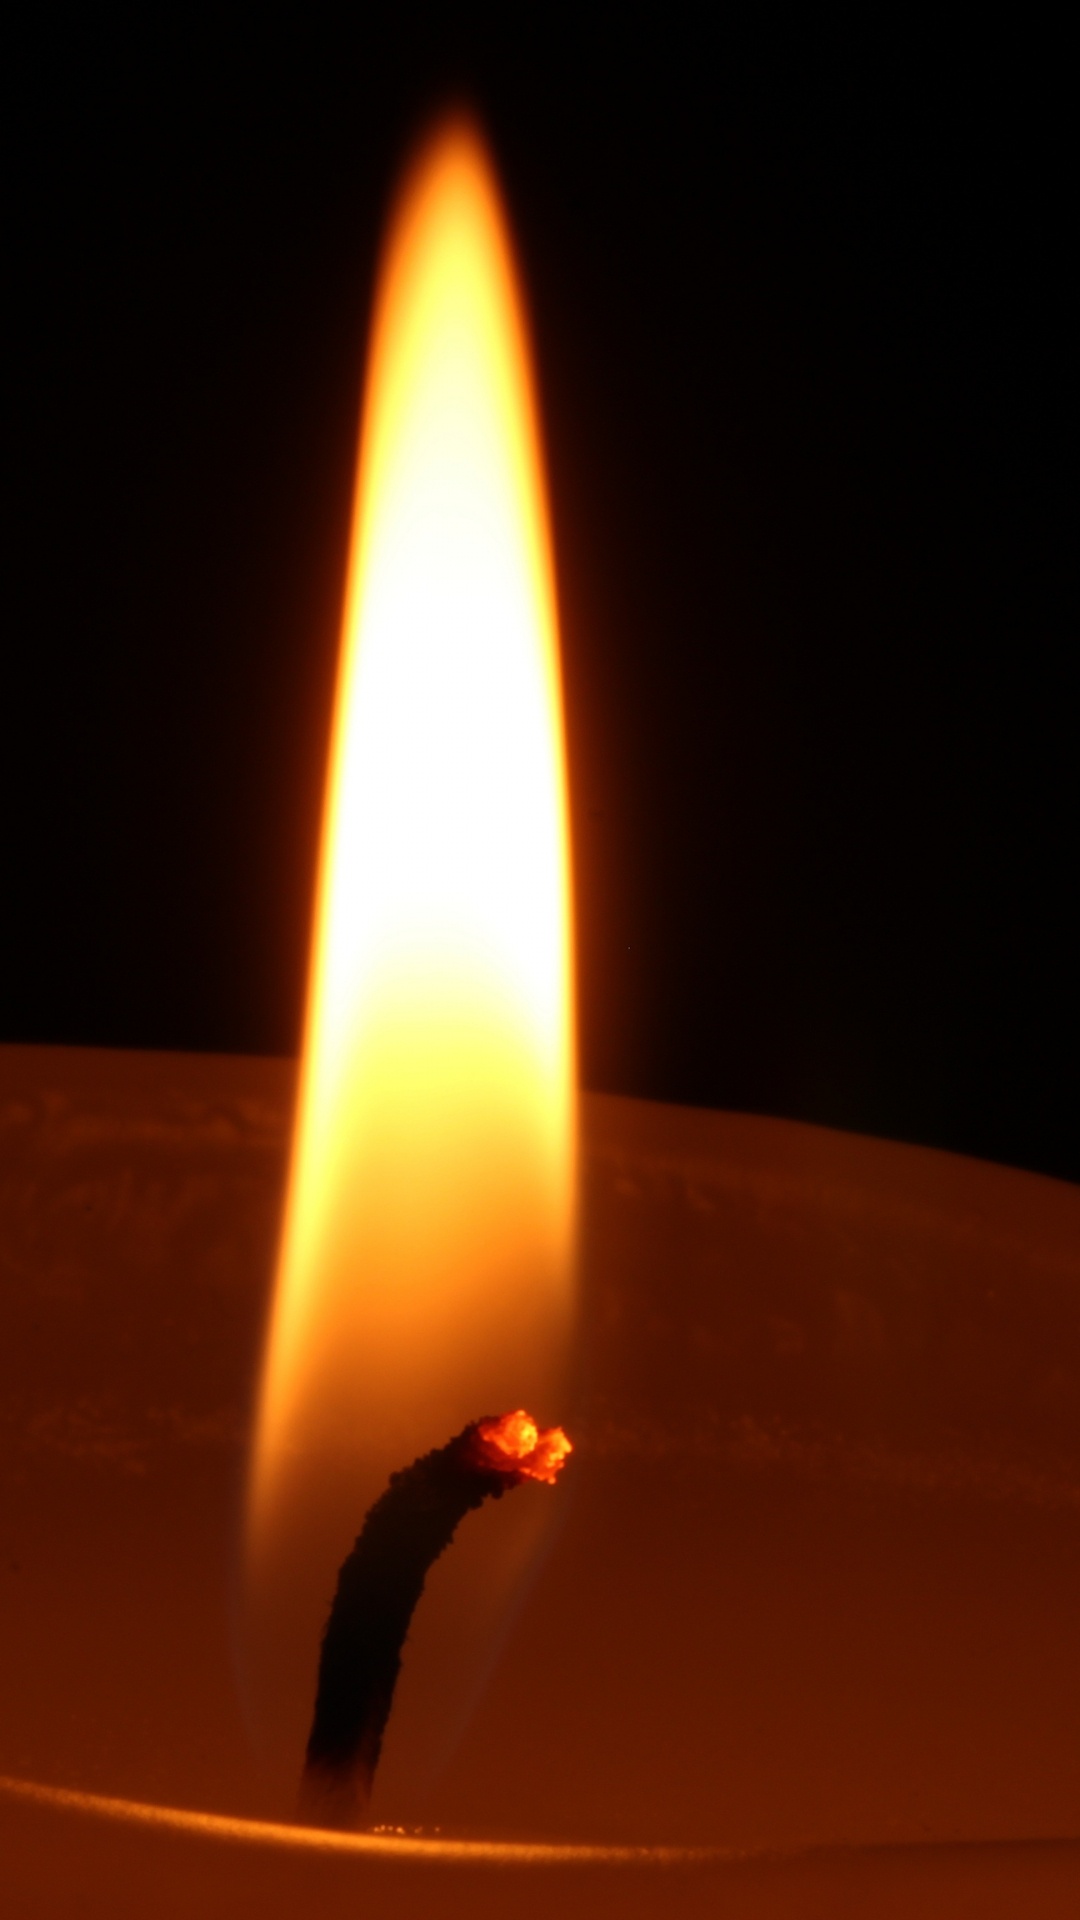 Lighted Candle in Dark Room. Wallpaper in 1080x1920 Resolution